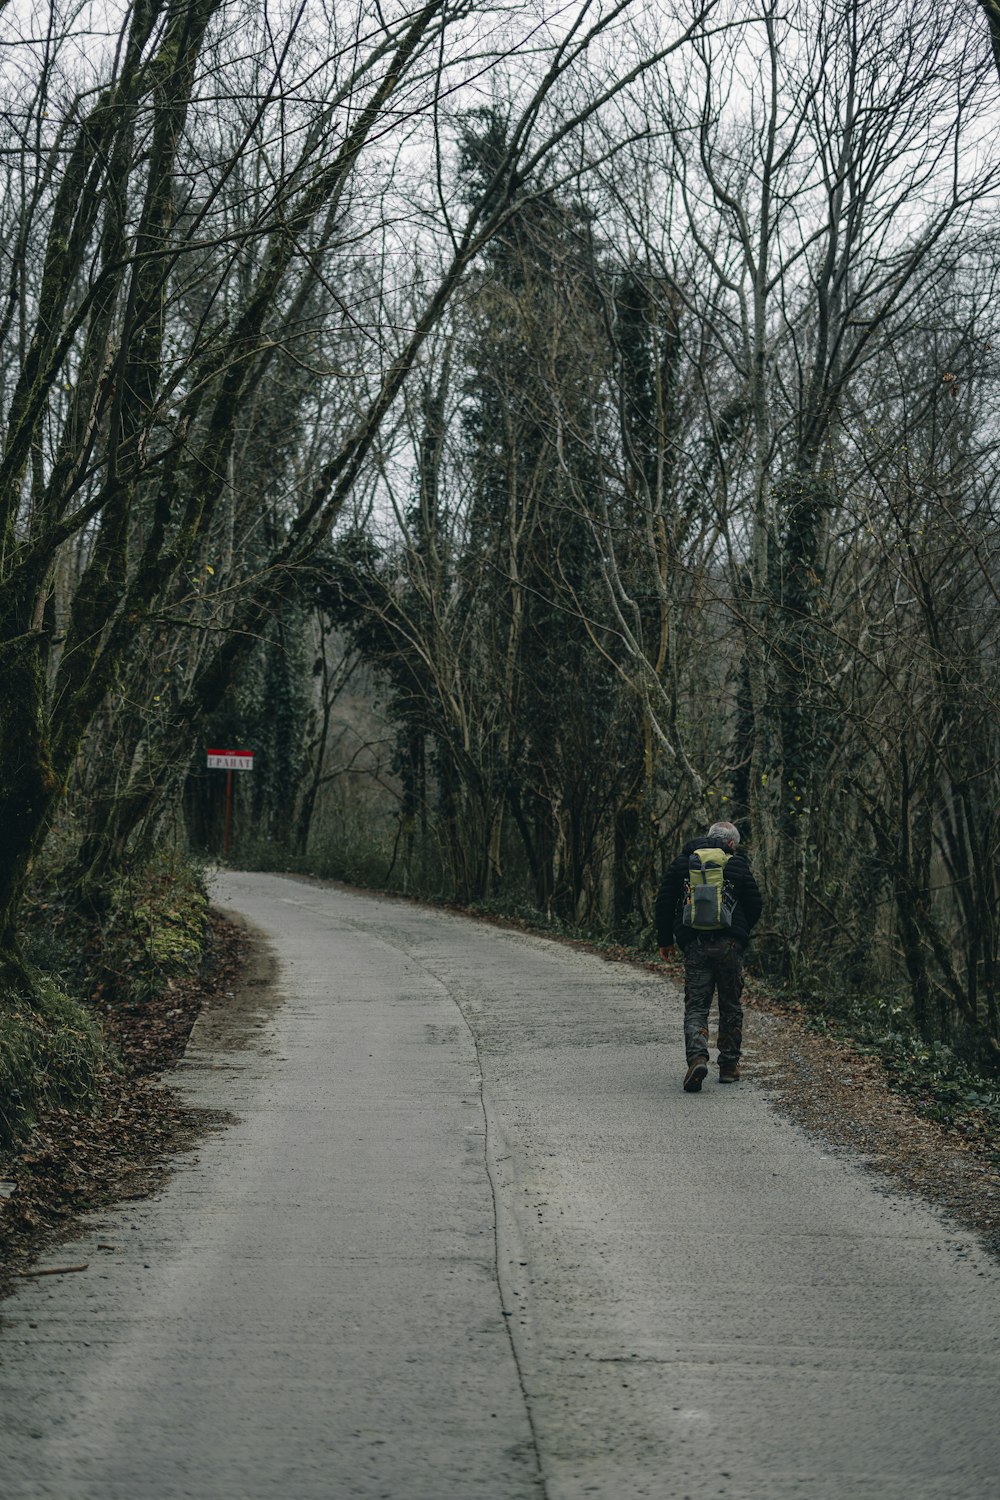 a person with a backpack walking down a road